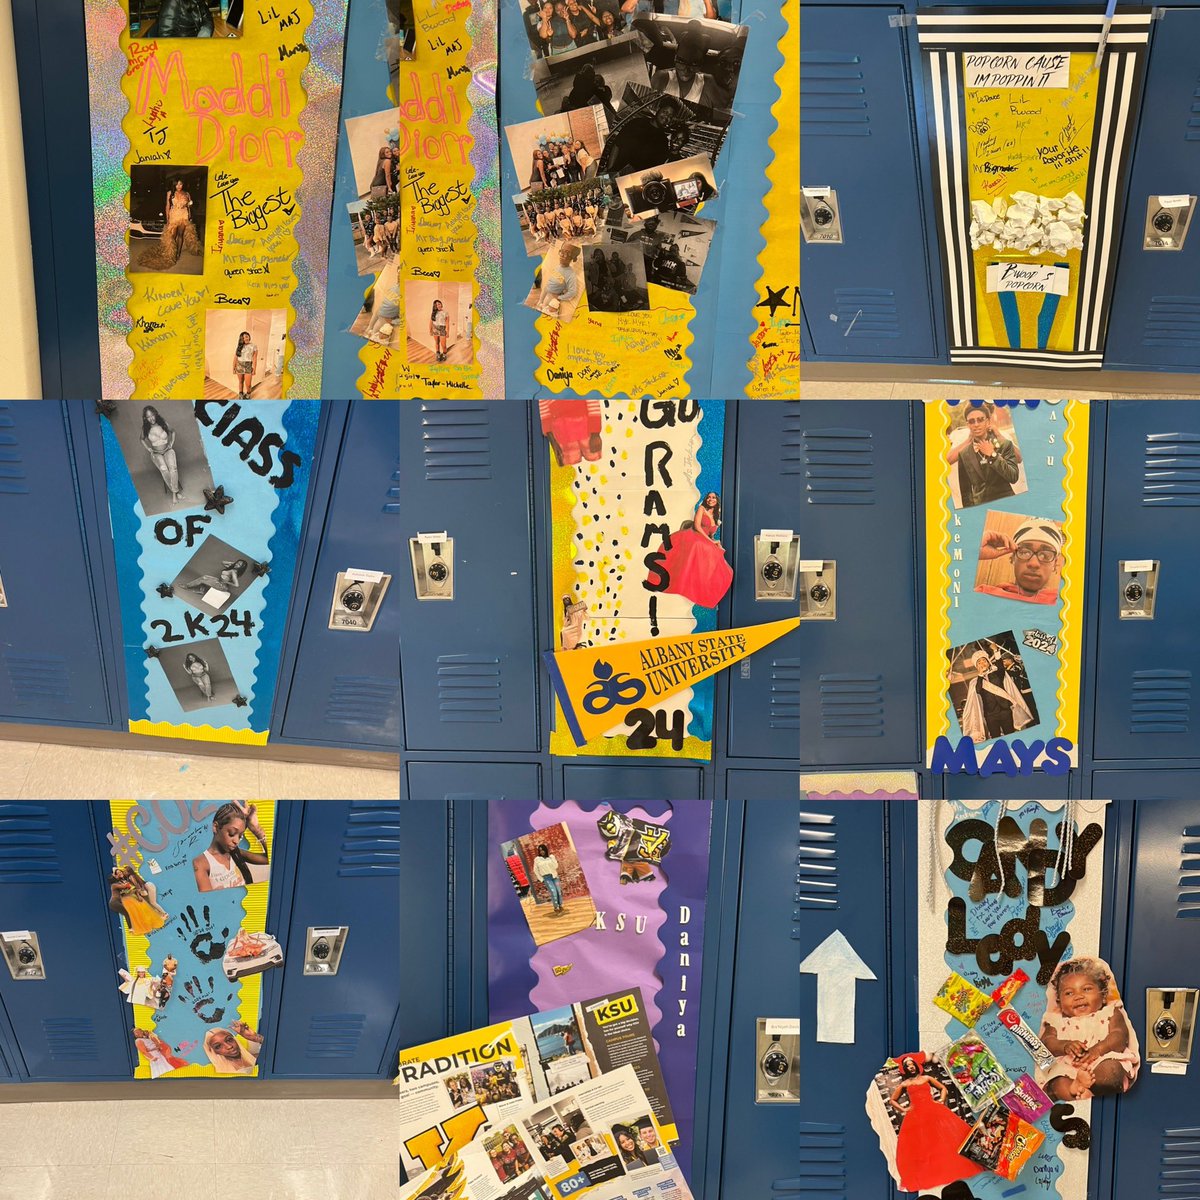 Class of ‘2️⃣4️⃣ “locked” down the final days of their Senior year by decorating their lockers. 👨🏾‍🎓👩🏽‍🎓💛🩵 @BEMaysPRIDE @MsReedtheAP